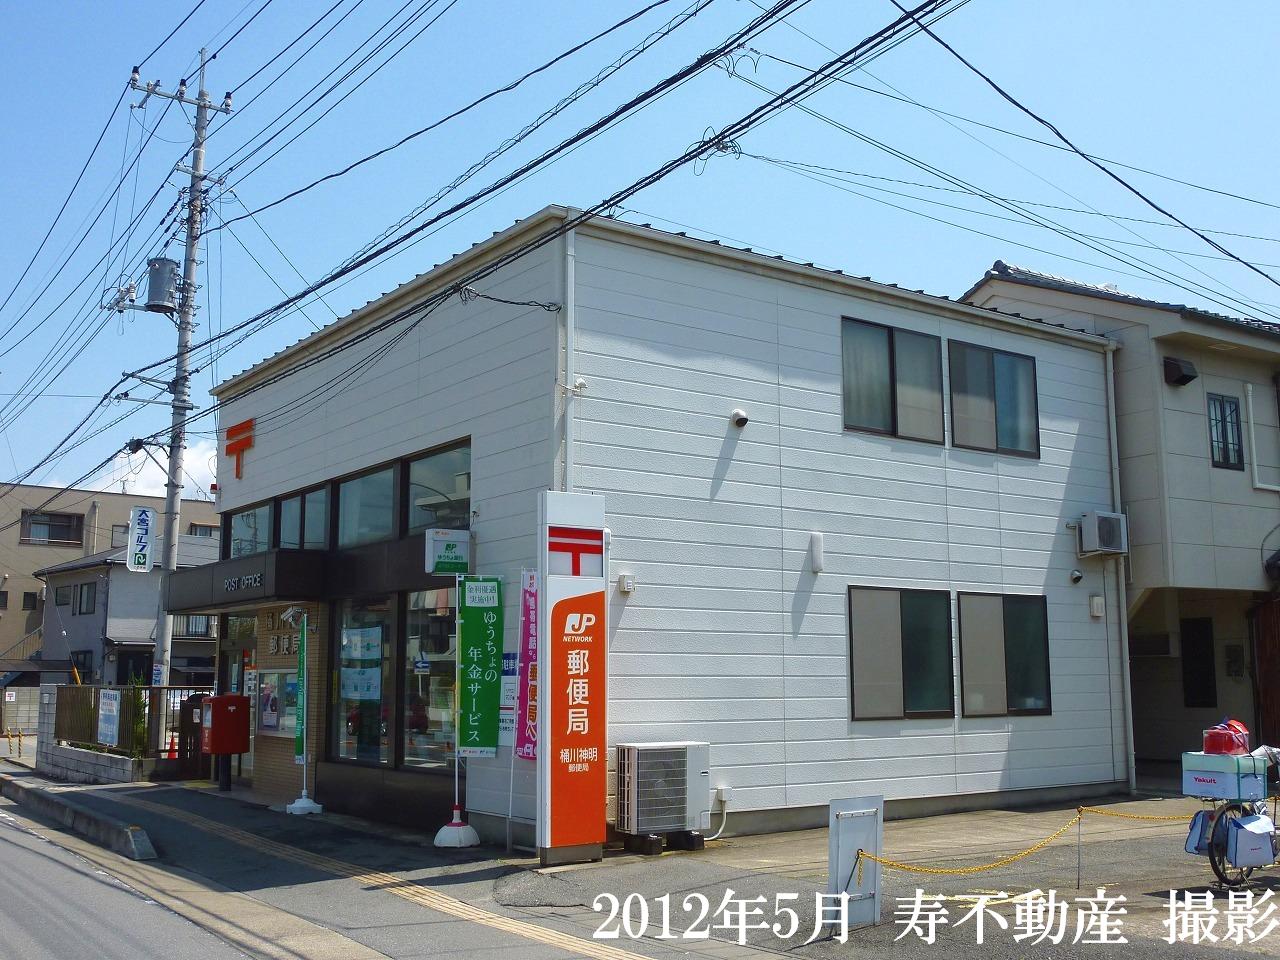 post office. Okegawa Shinmei 107m to the post office (post office)